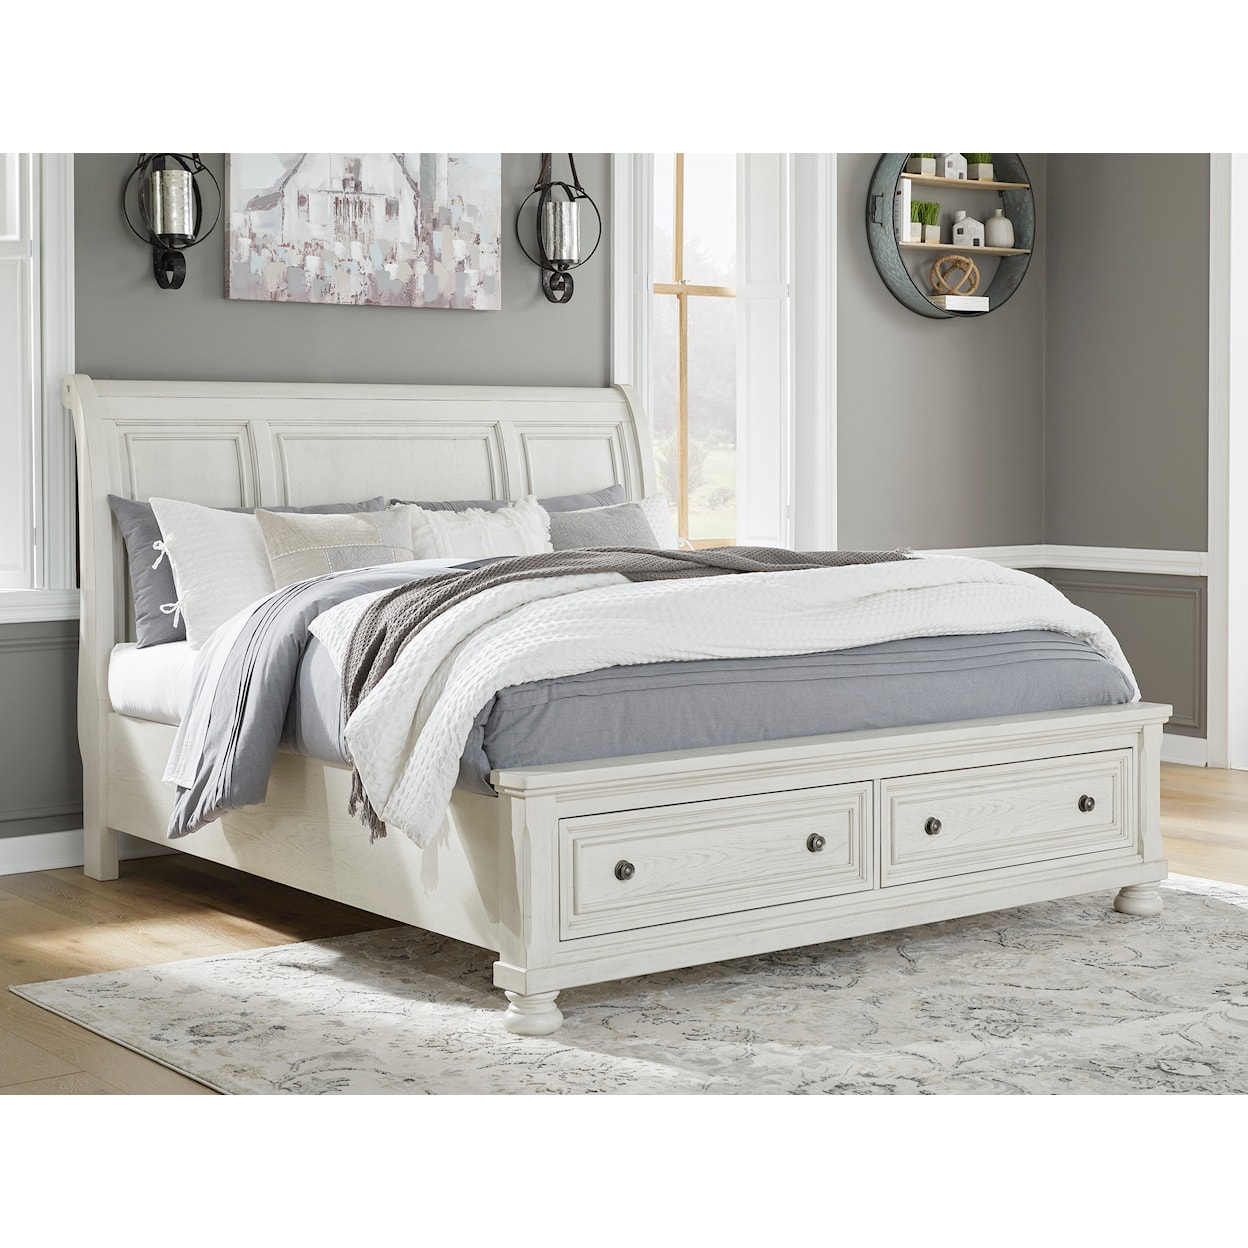 Benchcraft Robbinsdale California King Sleigh Bed with Storage